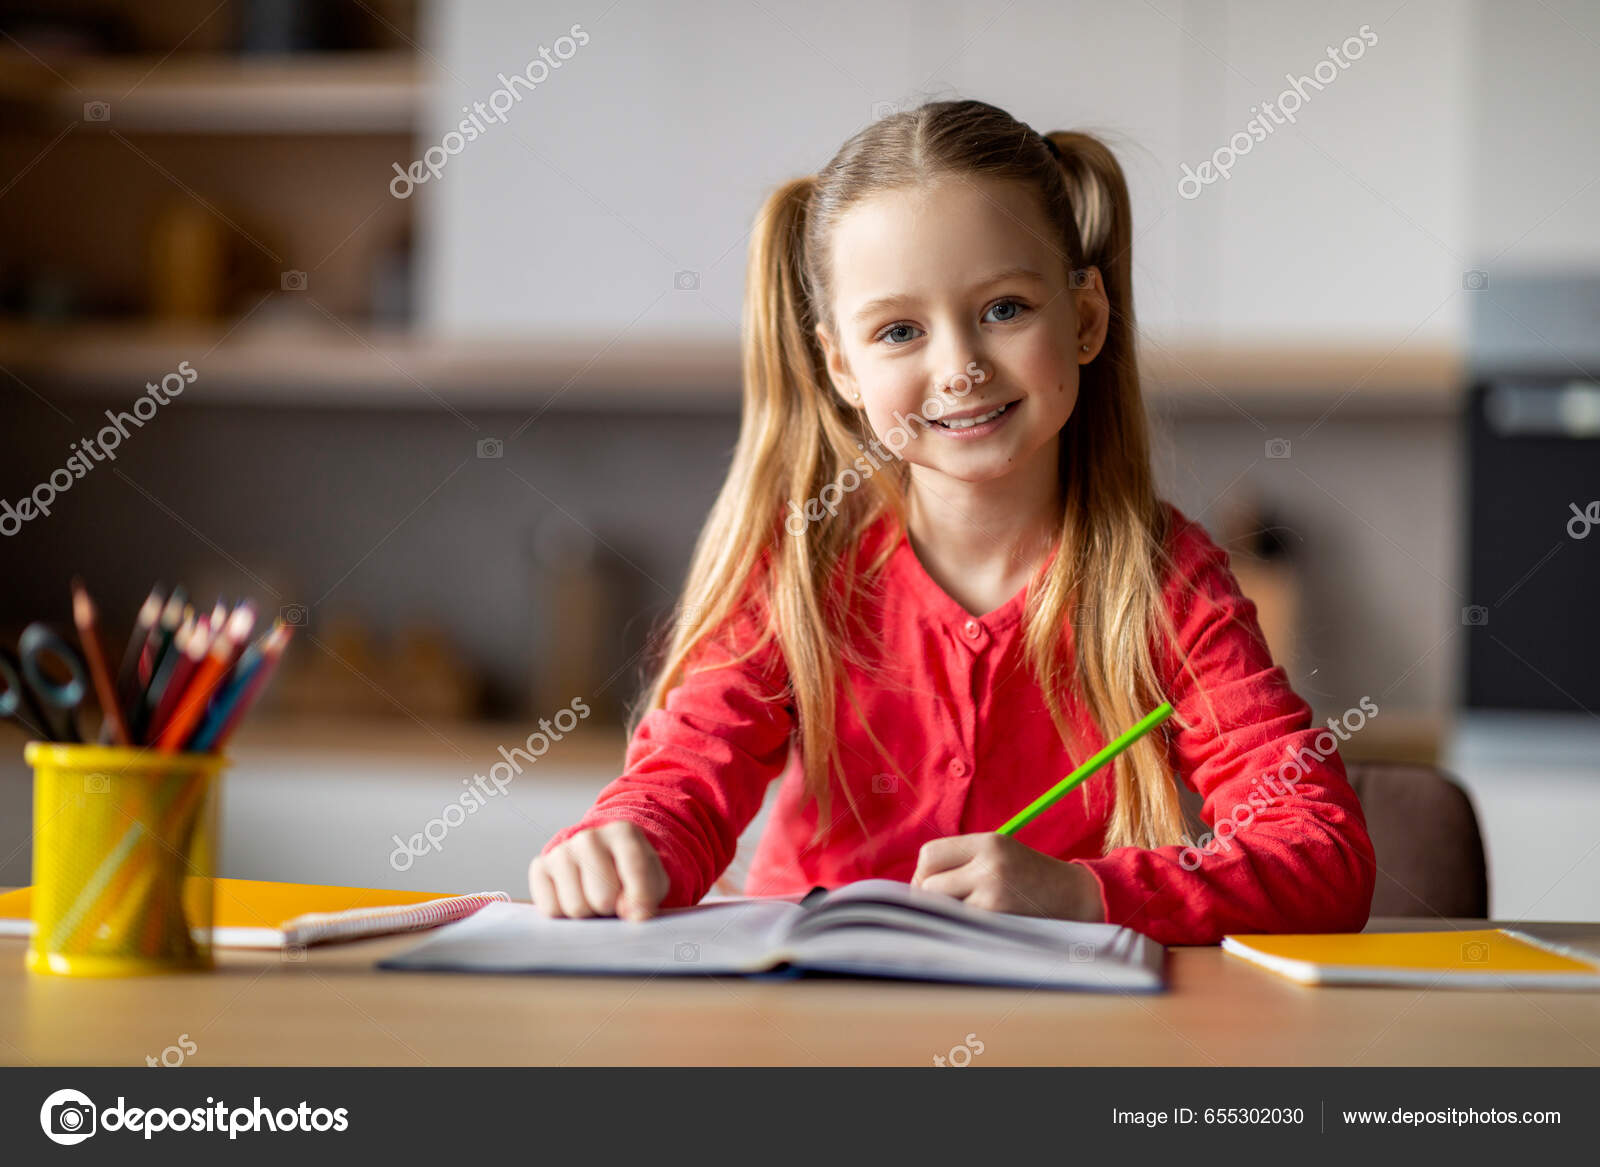 How to draw a Girl Studying Book, Pencil sketch for beginner, A girl  reading a book